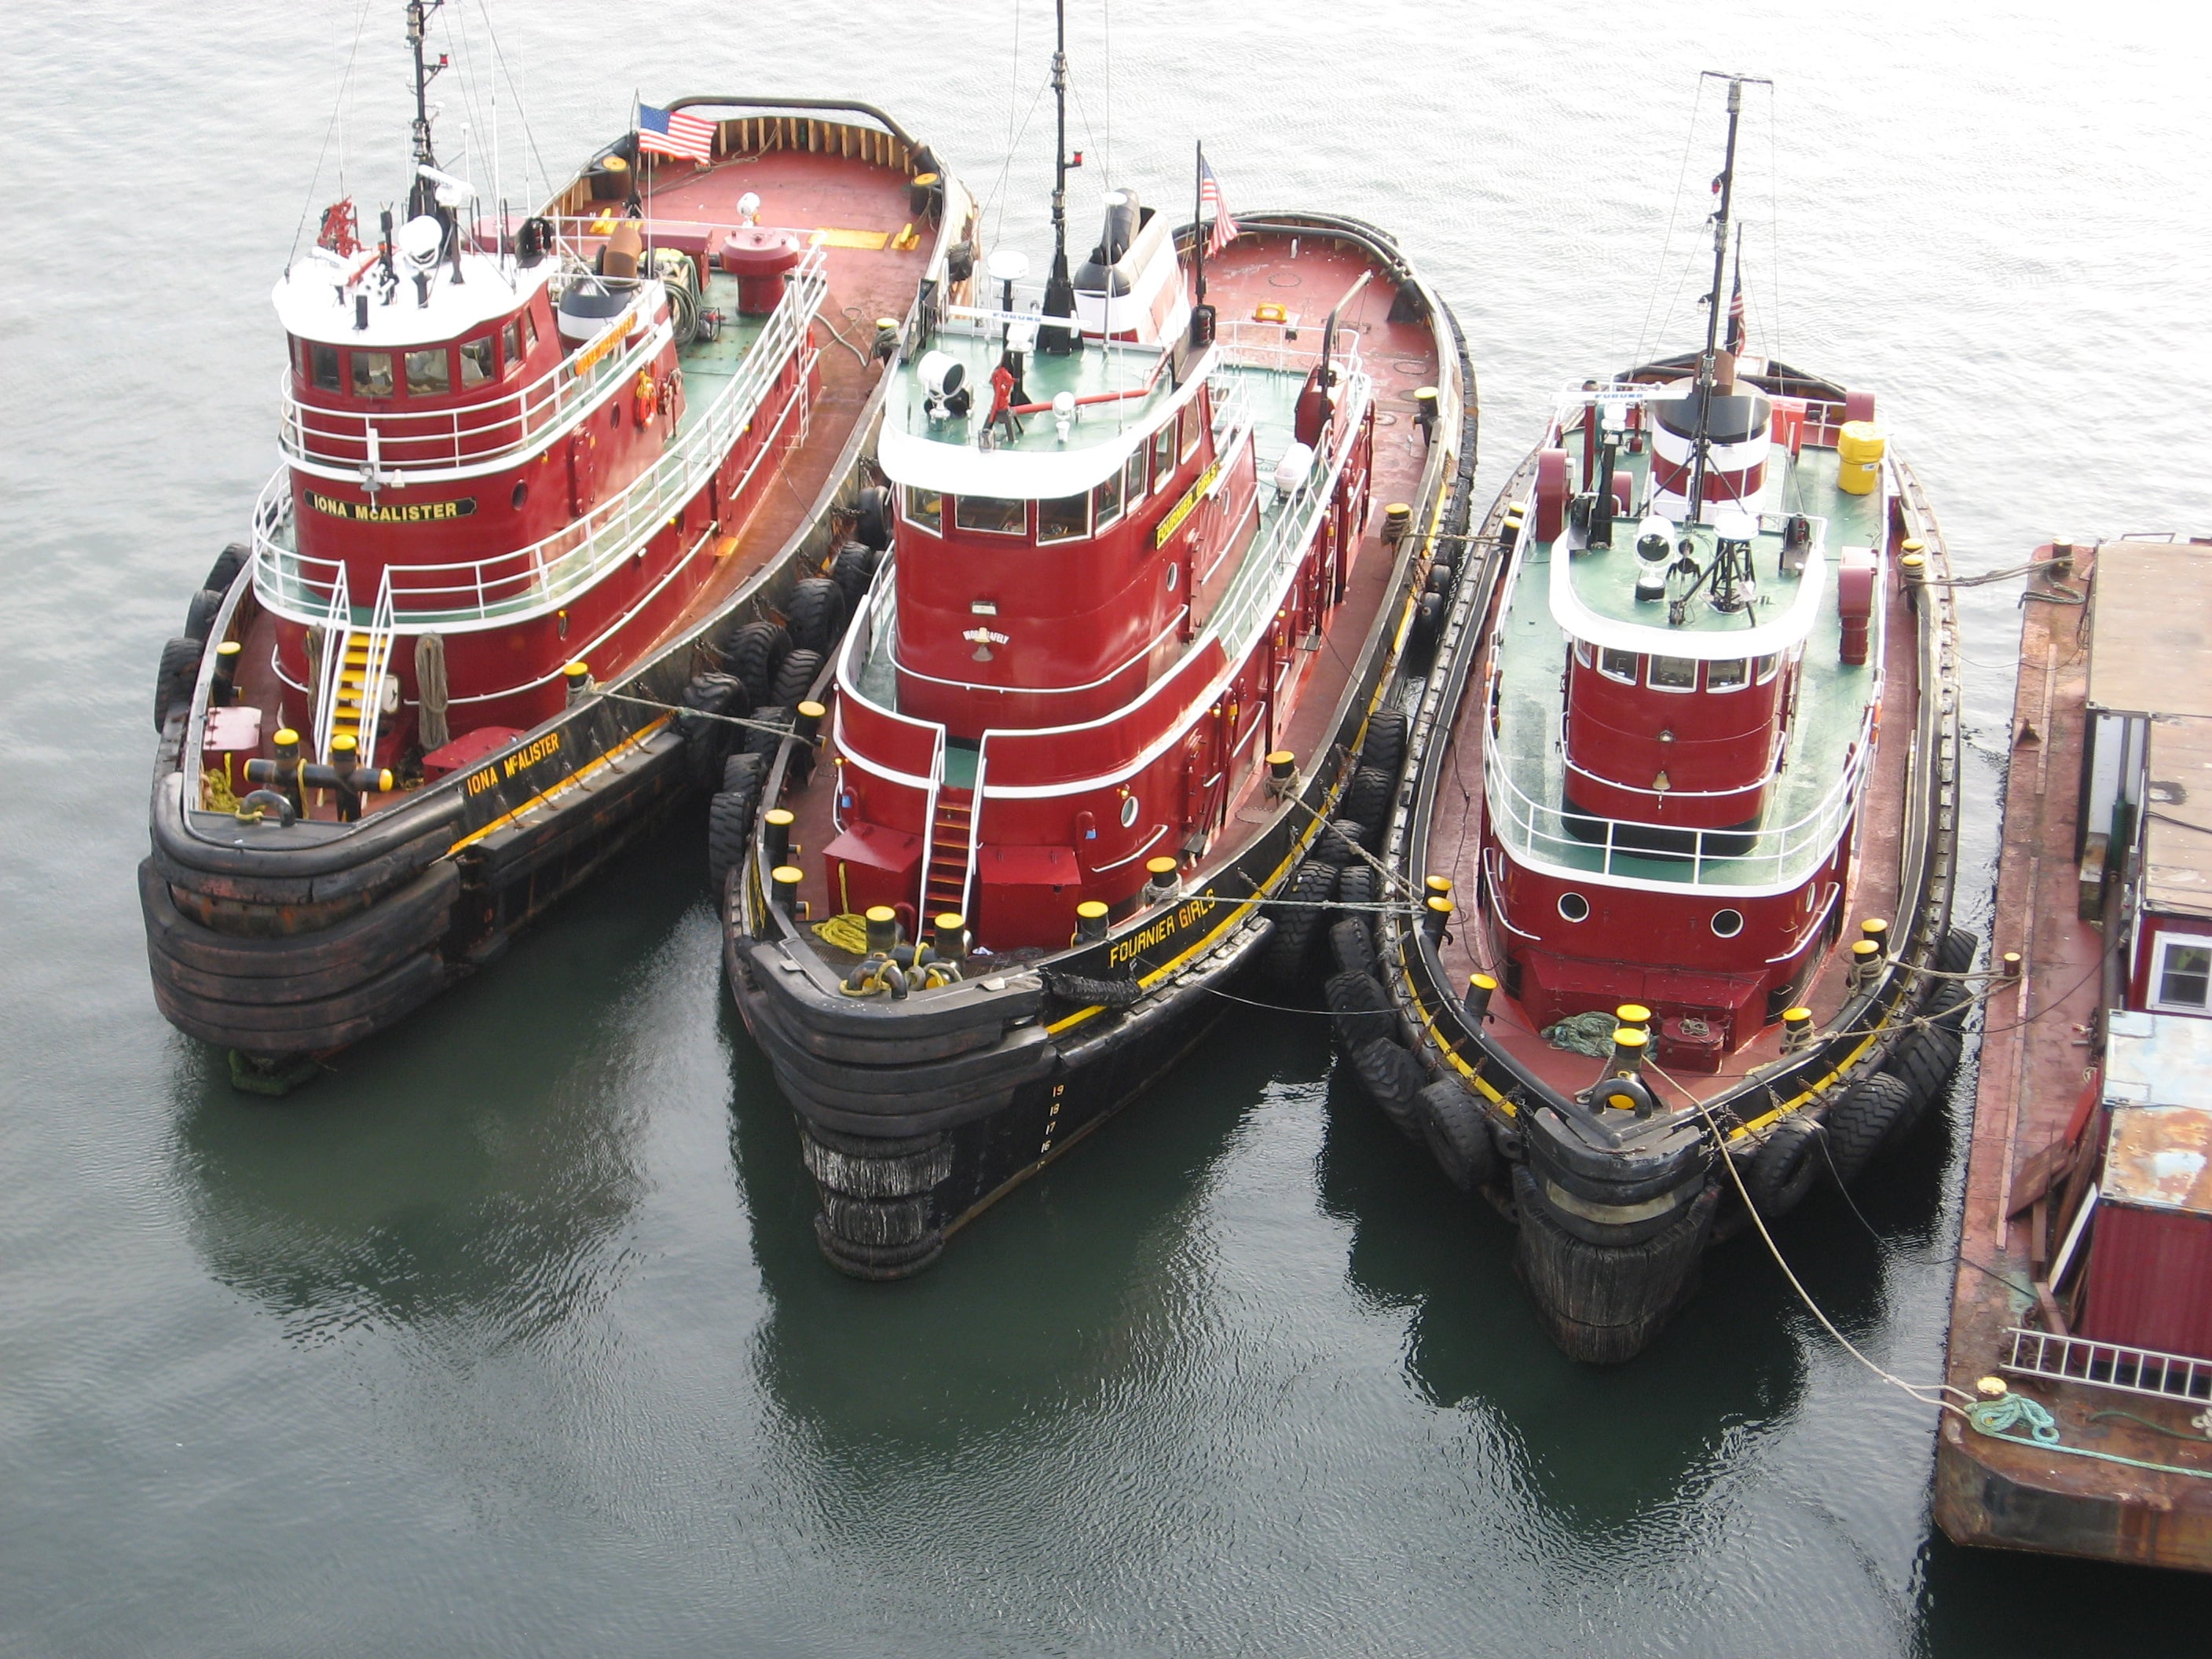 Tugs at Prince Edward Island by Larry Juday